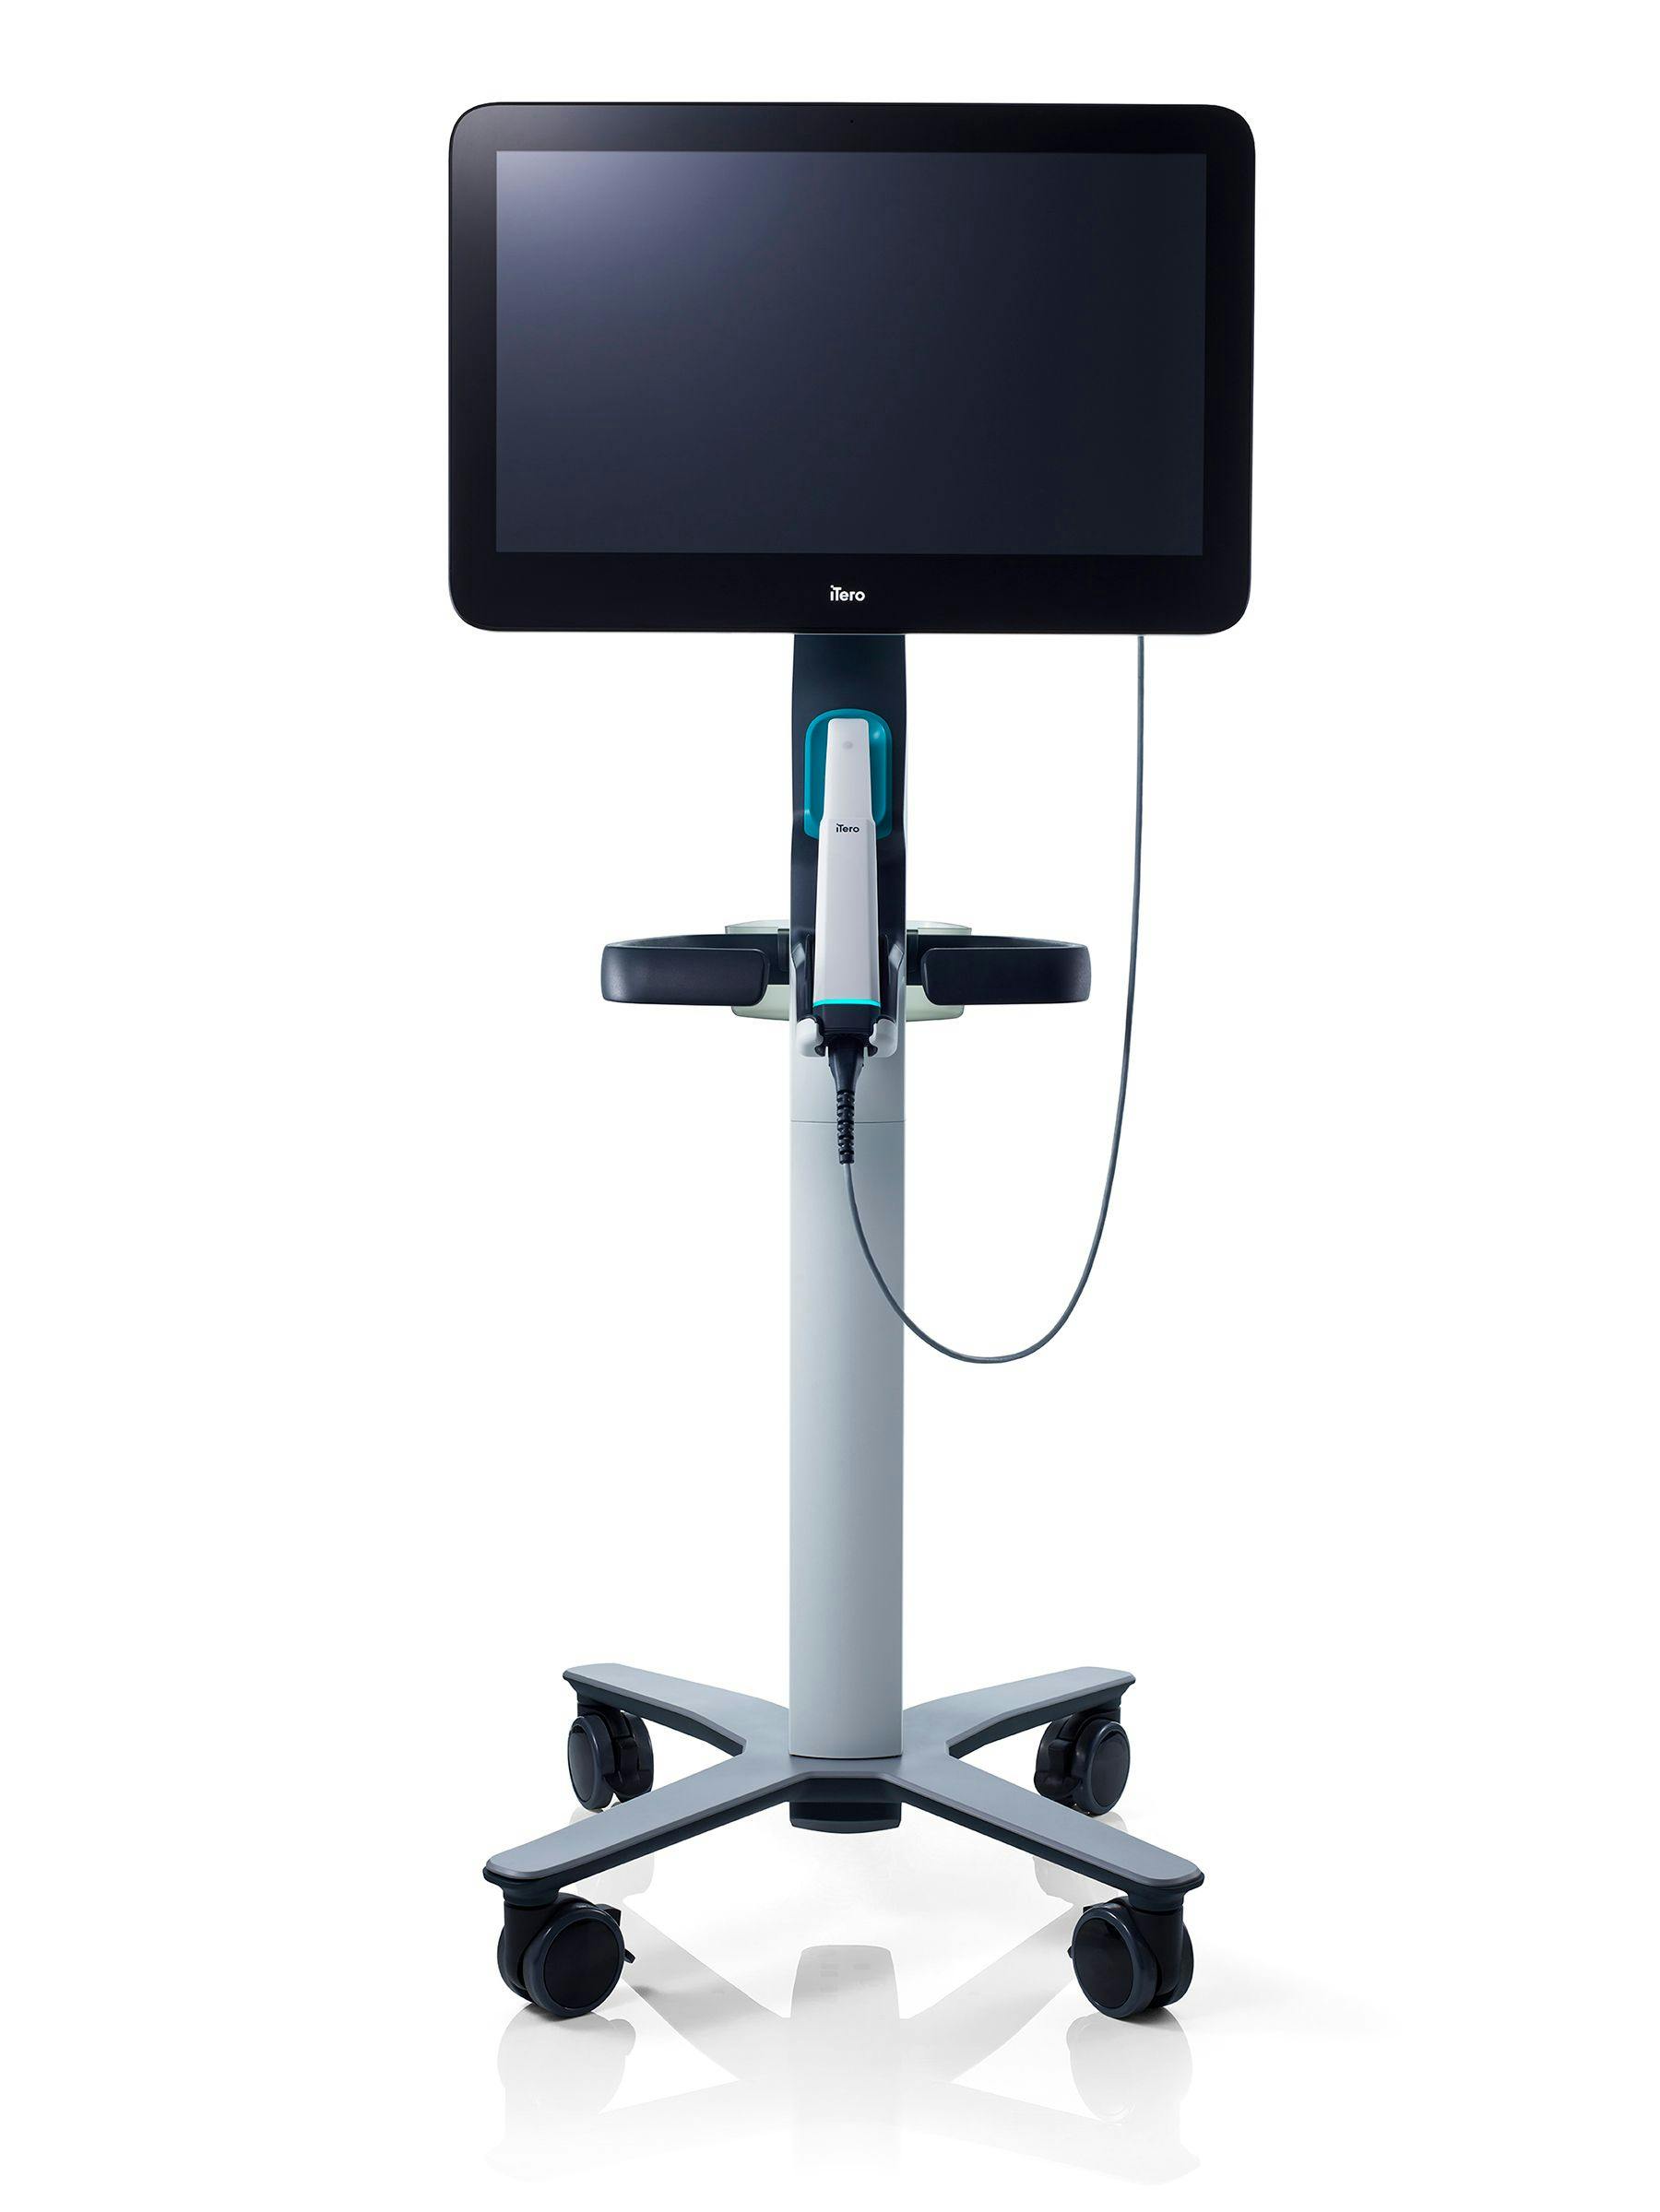 The iTero Lumina intraoral scanner is available in both cart and mobile configurations on the iTero Plus Series platform. | Image Credit: © Align Technology, Inc